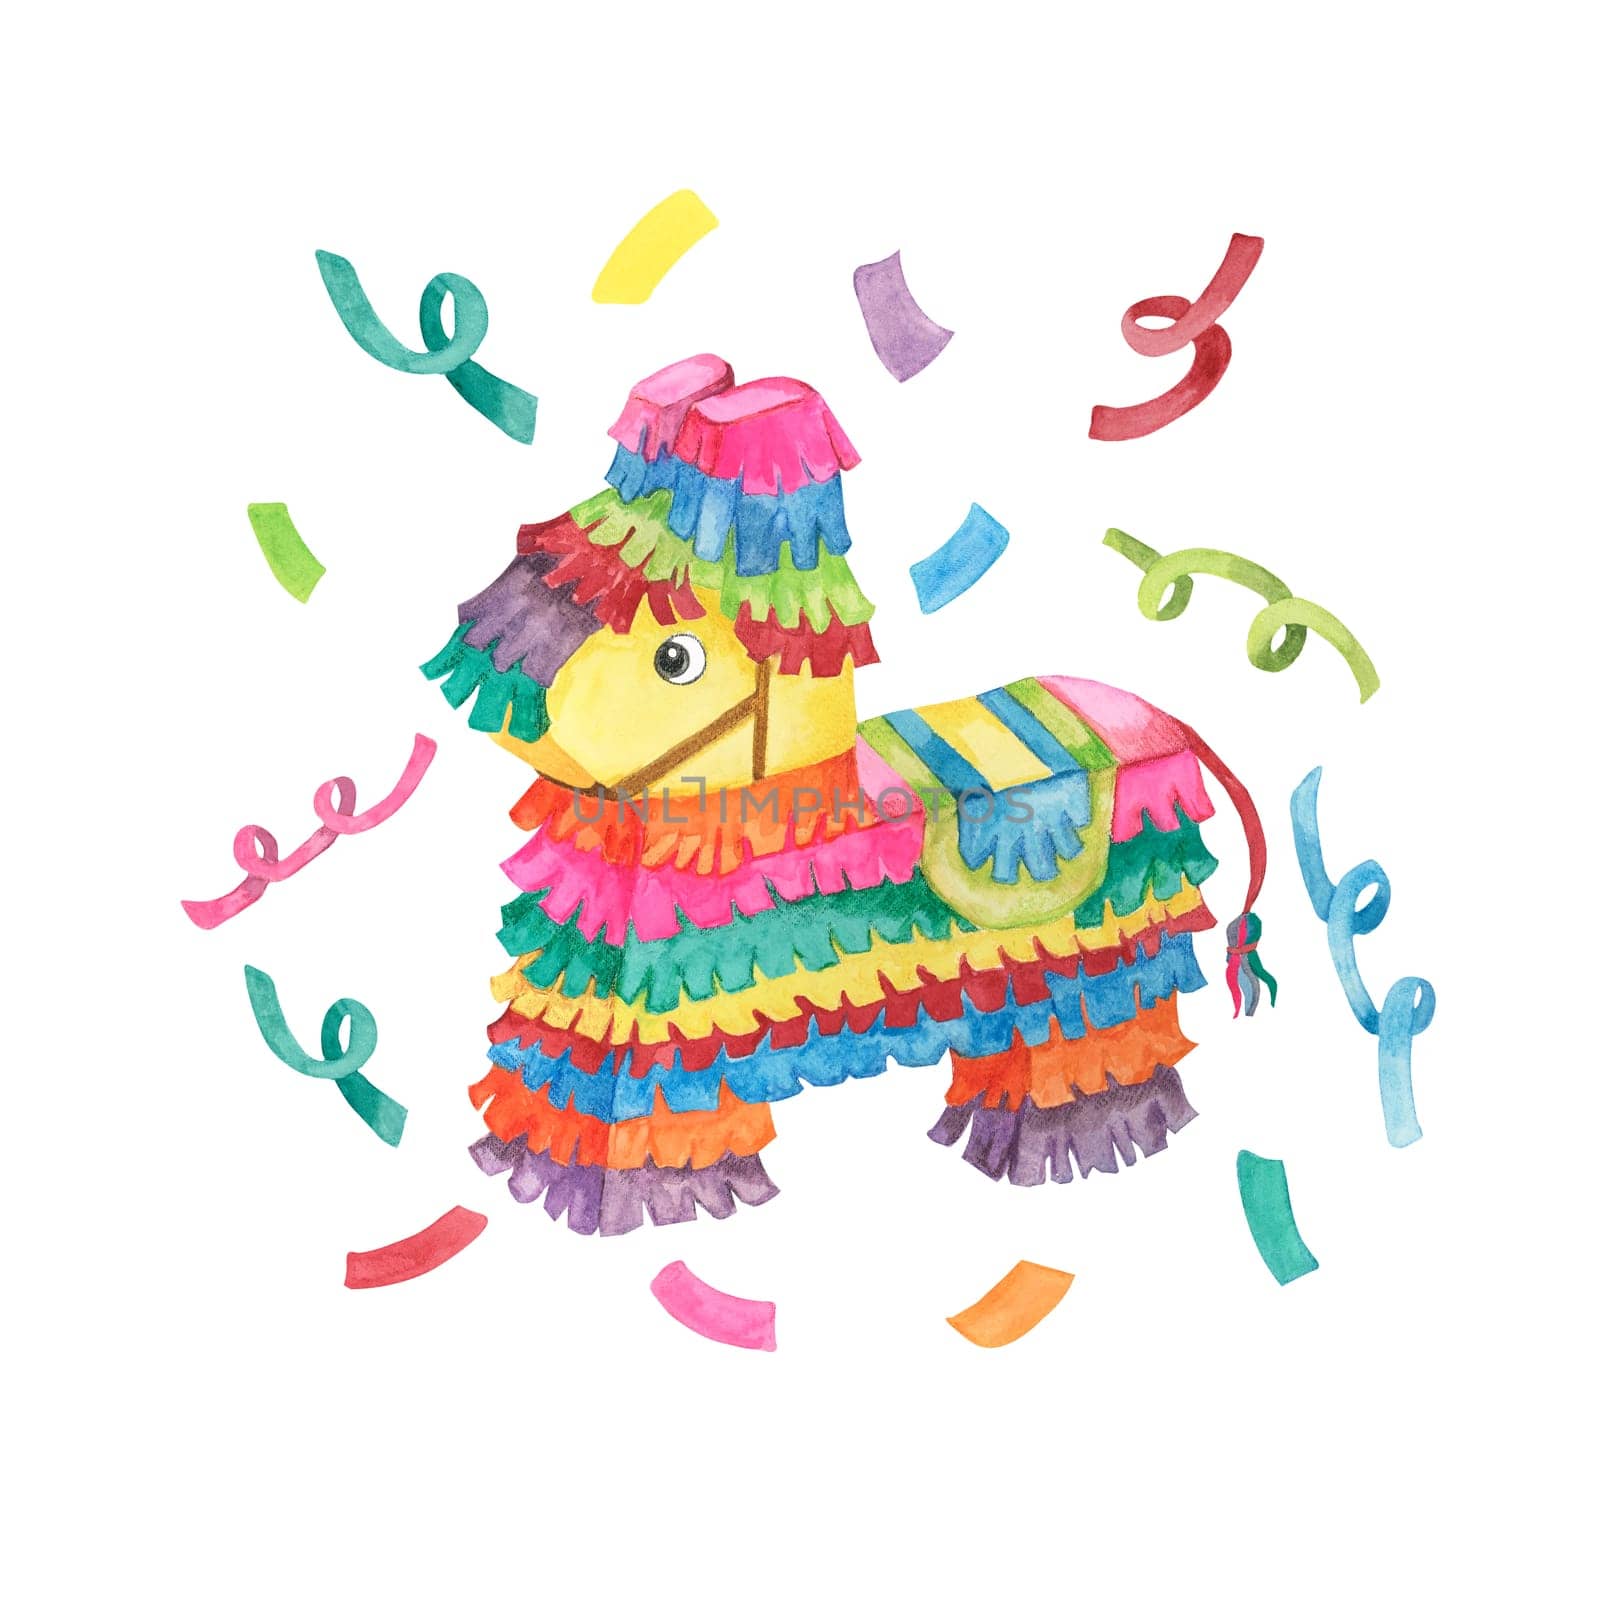 Colorful pinata with confetti in watercolor. Bright traditional party object designed as donkey with candy. Aquarelle clipart isolated on white background. designs for cards, printing, cinco de mayo